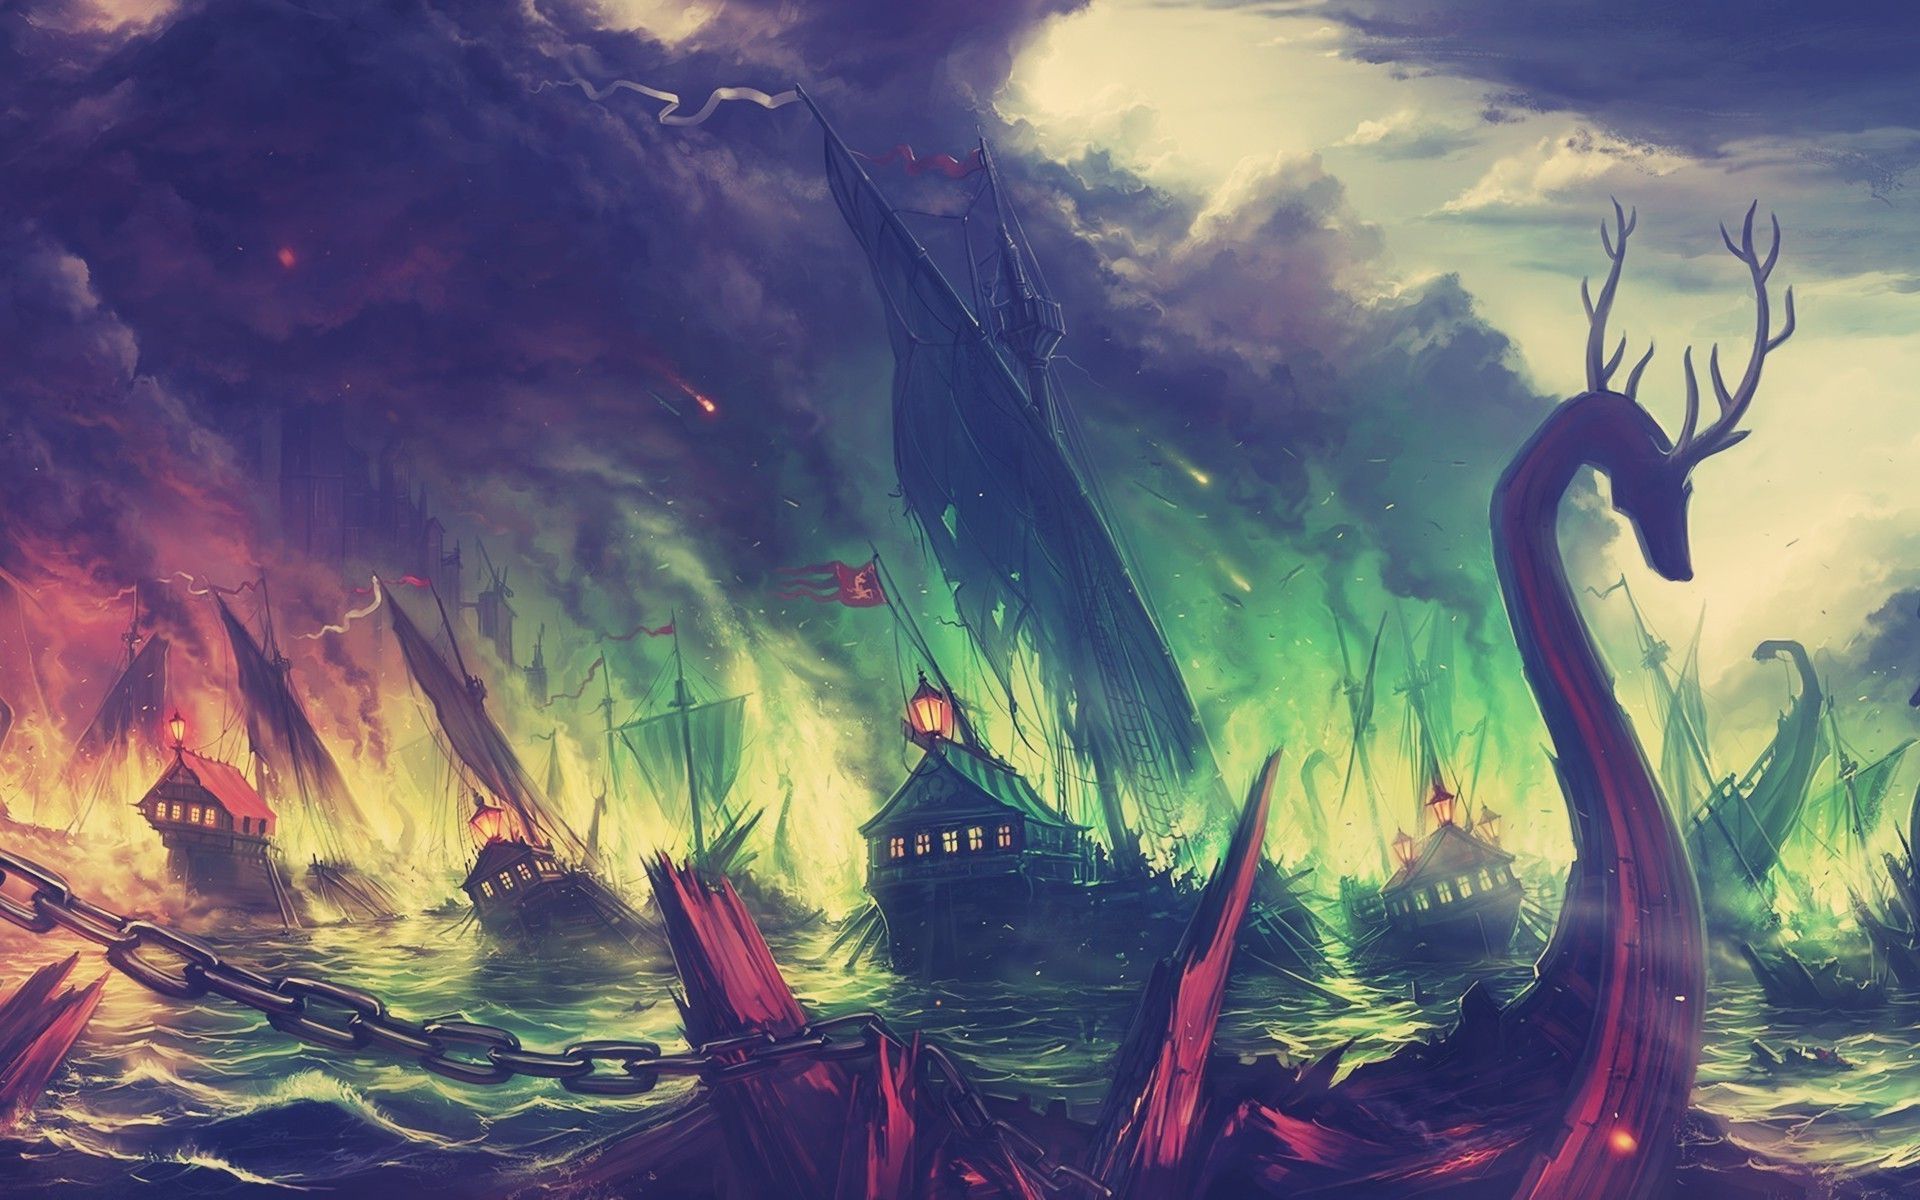 fantasy Art, Game Of Thrones, Blackwater, Fire, Boat, Colorful ...